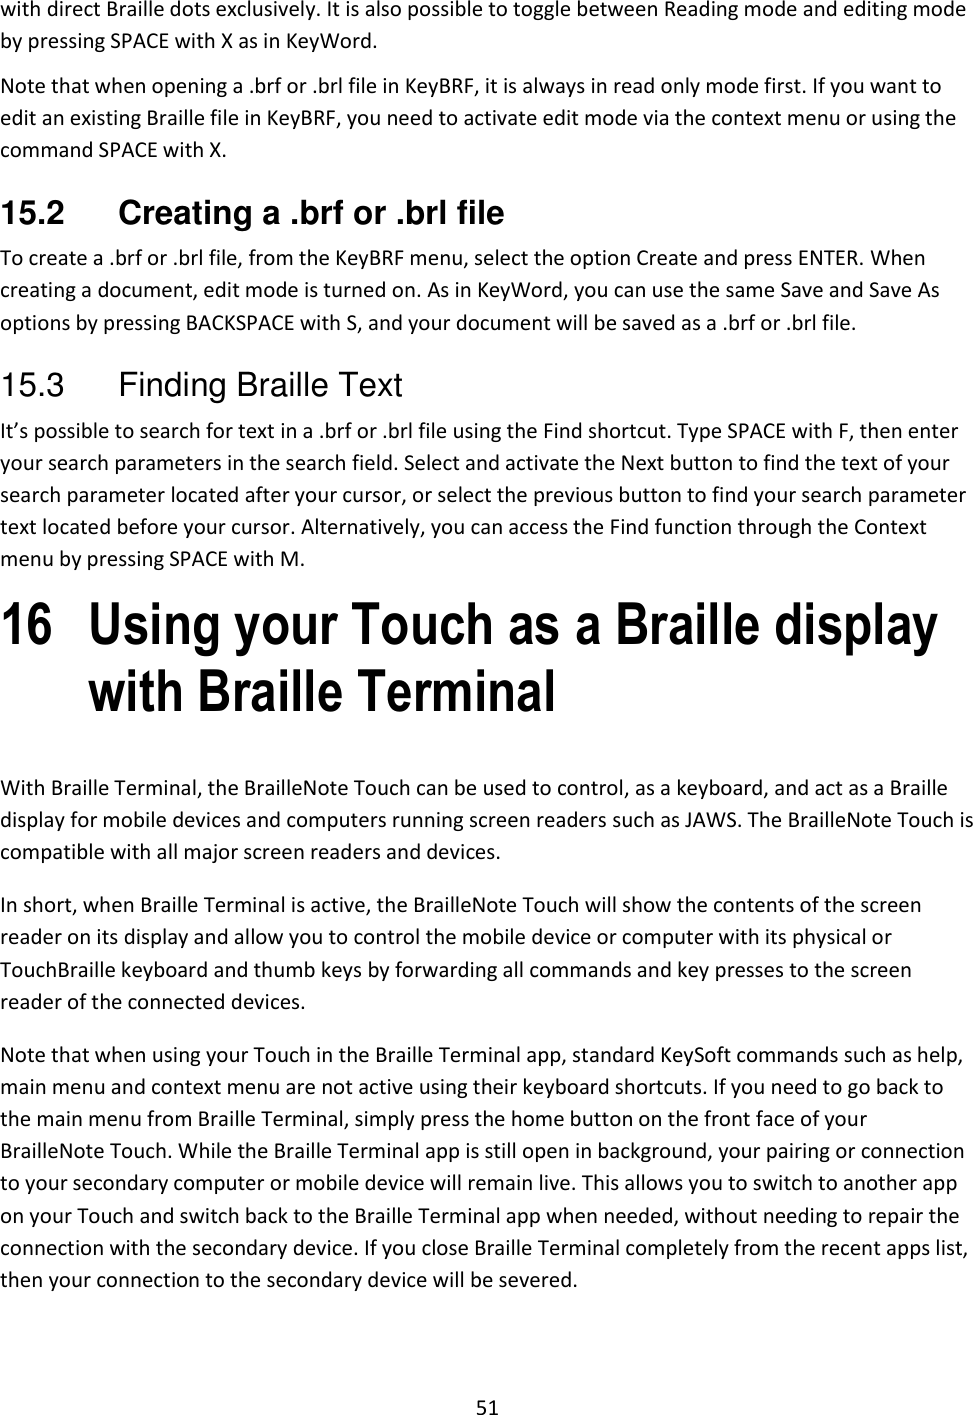 51 with direct Braille dots exclusively. It is also possible to toggle between Reading mode and editing mode by pressing SPACE with X as in KeyWord. Note that when opening a .brf or .brl file in KeyBRF, it is always in read only mode first. If you want to edit an existing Braille file in KeyBRF, you need to activate edit mode via the context menu or using the command SPACE with X. 15.2  Creating a .brf or .brl file To create a .brf or .brl file, from the KeyBRF menu, select the option Create and press ENTER. When creating a document, edit mode is turned on. As in KeyWord, you can use the same Save and Save As options by pressing BACKSPACE with S, and your document will be saved as a .brf or .brl file.  15.3  Finding Braille Text It’s possible to search for text in a .brf or .brl file using the Find shortcut. Type SPACE with F, then enter your search parameters in the search field. Select and activate the Next button to find the text of your search parameter located after your cursor, or select the previous button to find your search parameter text located before your cursor. Alternatively, you can access the Find function through the Context menu by pressing SPACE with M. 16 Using your Touch as a Braille display with Braille Terminal With Braille Terminal, the BrailleNote Touch can be used to control, as a keyboard, and act as a Braille display for mobile devices and computers running screen readers such as JAWS. The BrailleNote Touch is compatible with all major screen readers and devices. In short, when Braille Terminal is active, the BrailleNote Touch will show the contents of the screen reader on its display and allow you to control the mobile device or computer with its physical or TouchBraille keyboard and thumb keys by forwarding all commands and key presses to the screen reader of the connected devices.  Note that when using your Touch in the Braille Terminal app, standard KeySoft commands such as help, main menu and context menu are not active using their keyboard shortcuts. If you need to go back to the main menu from Braille Terminal, simply press the home button on the front face of your BrailleNote Touch. While the Braille Terminal app is still open in background, your pairing or connection to your secondary computer or mobile device will remain live. This allows you to switch to another app on your Touch and switch back to the Braille Terminal app when needed, without needing to repair the connection with the secondary device. If you close Braille Terminal completely from the recent apps list, then your connection to the secondary device will be severed. 